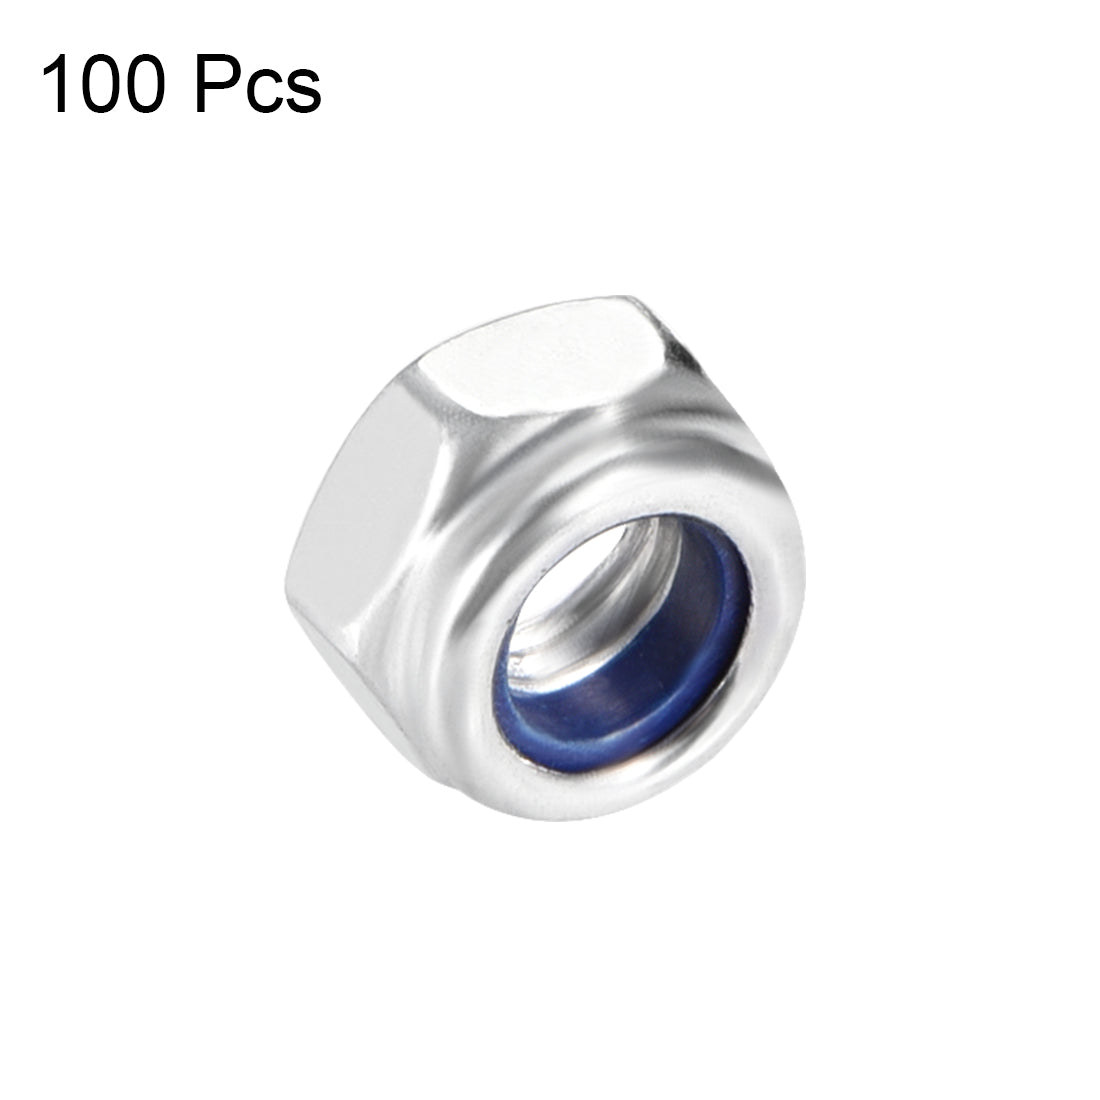 uxcell Uxcell M5 x 0.8mm Nylon Insert Hex Lock Nuts, Carbon Steel White Zinc Plated, 100 Pcs